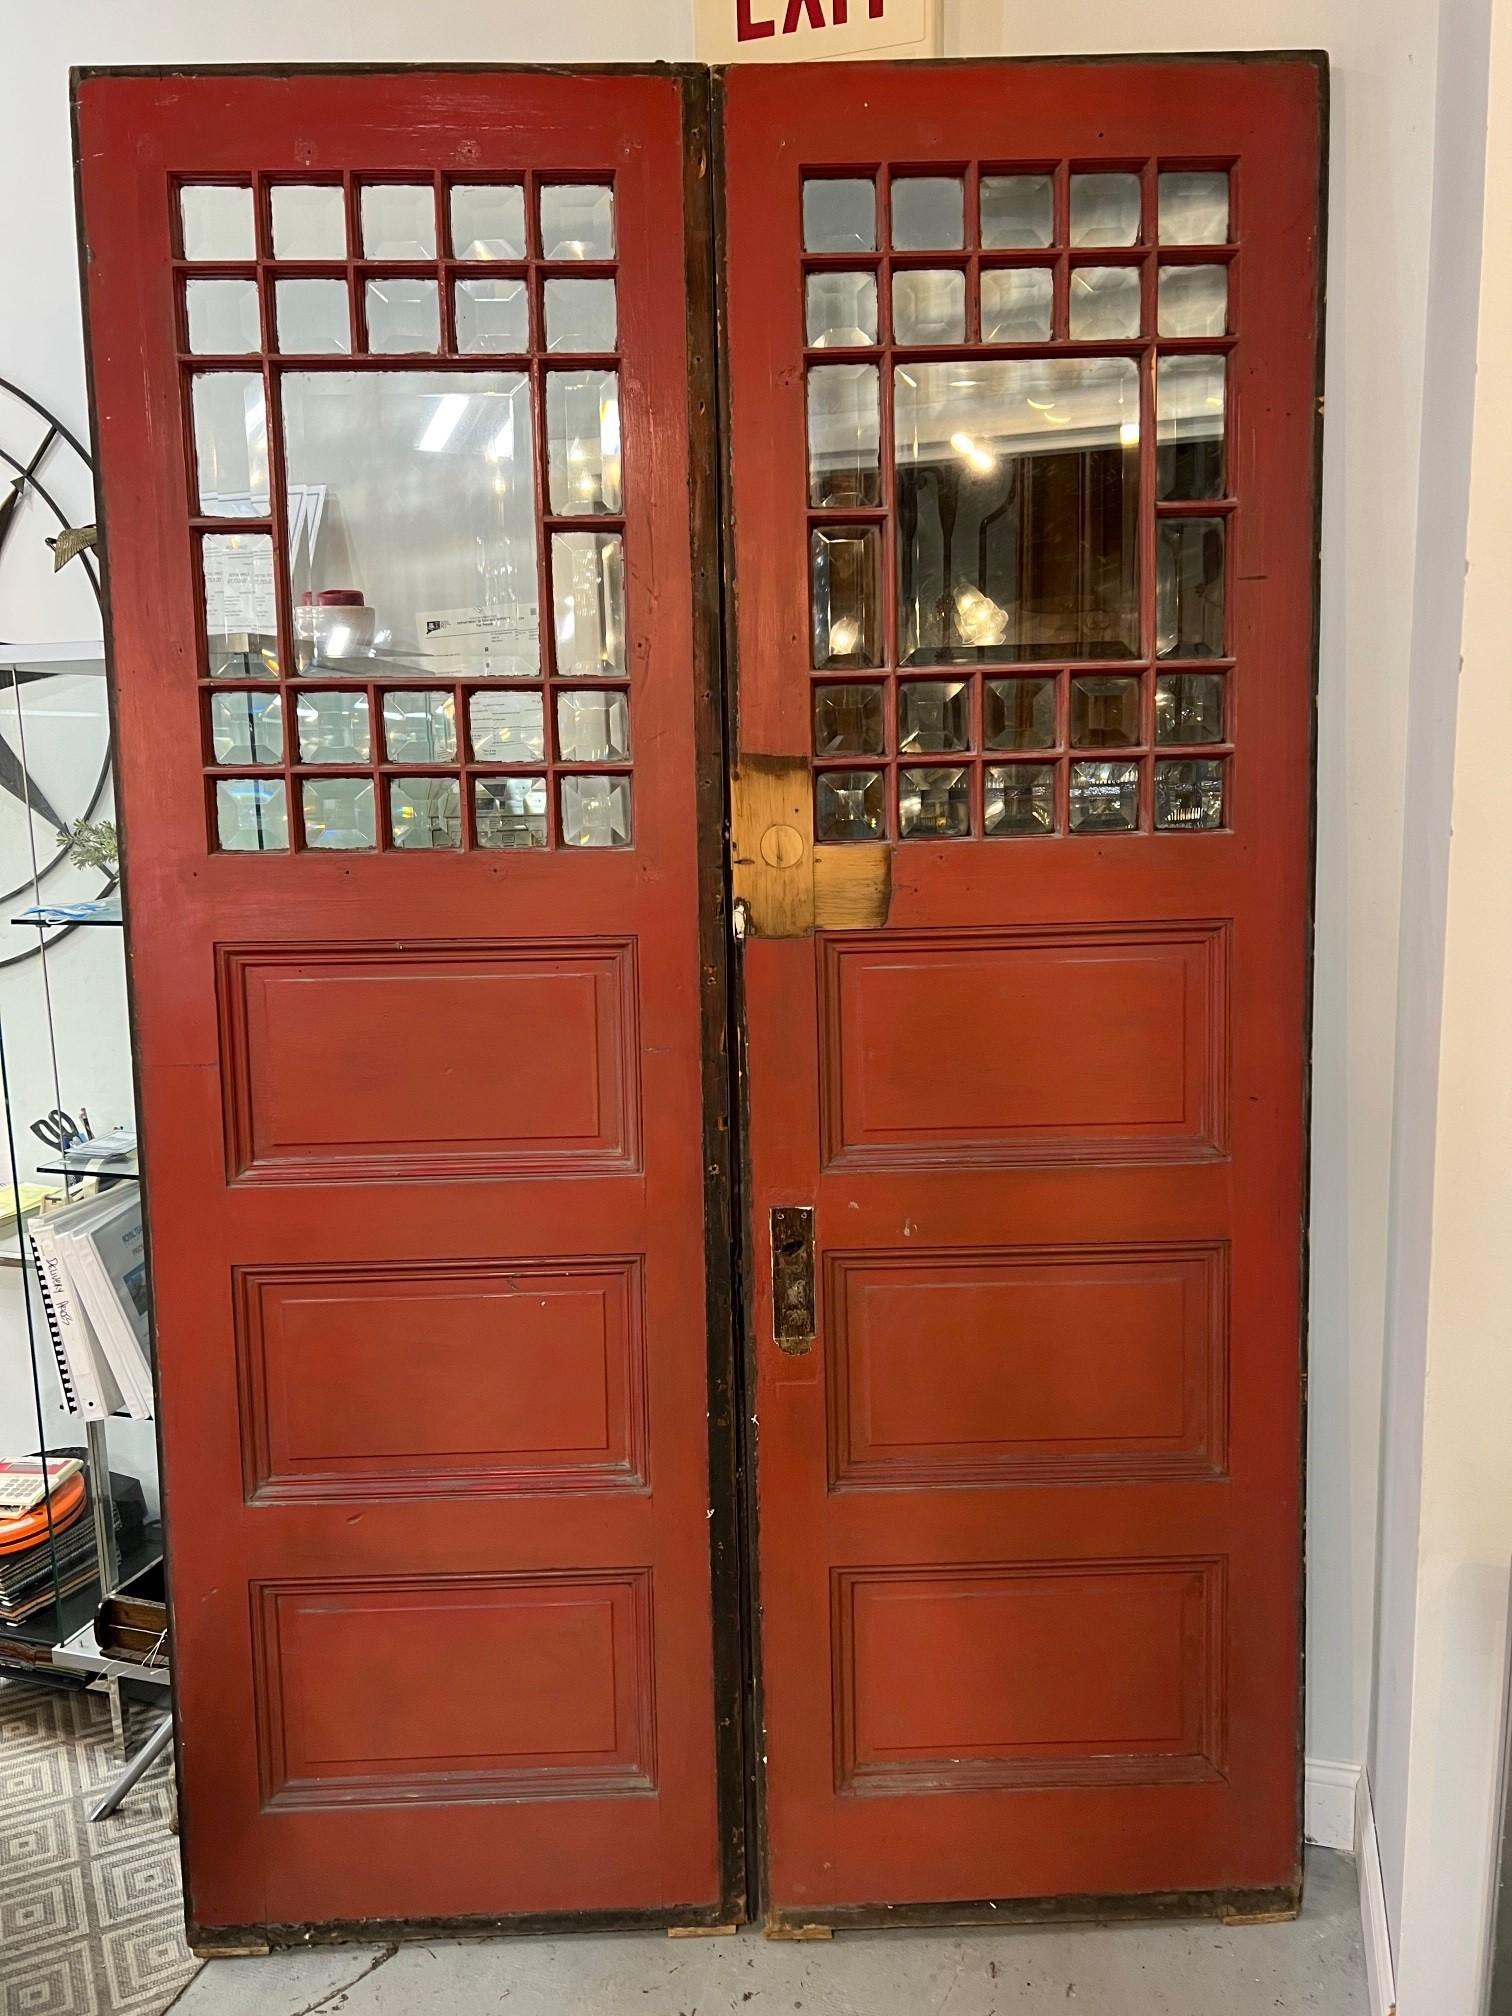 Early 20th century pair of doors with beveled glass panels from a Western Pennsylvania estate. The 24 small beveled panels around a larger panel make the doors very unique and look fantastic with the sun or any light shining on the beveled glass